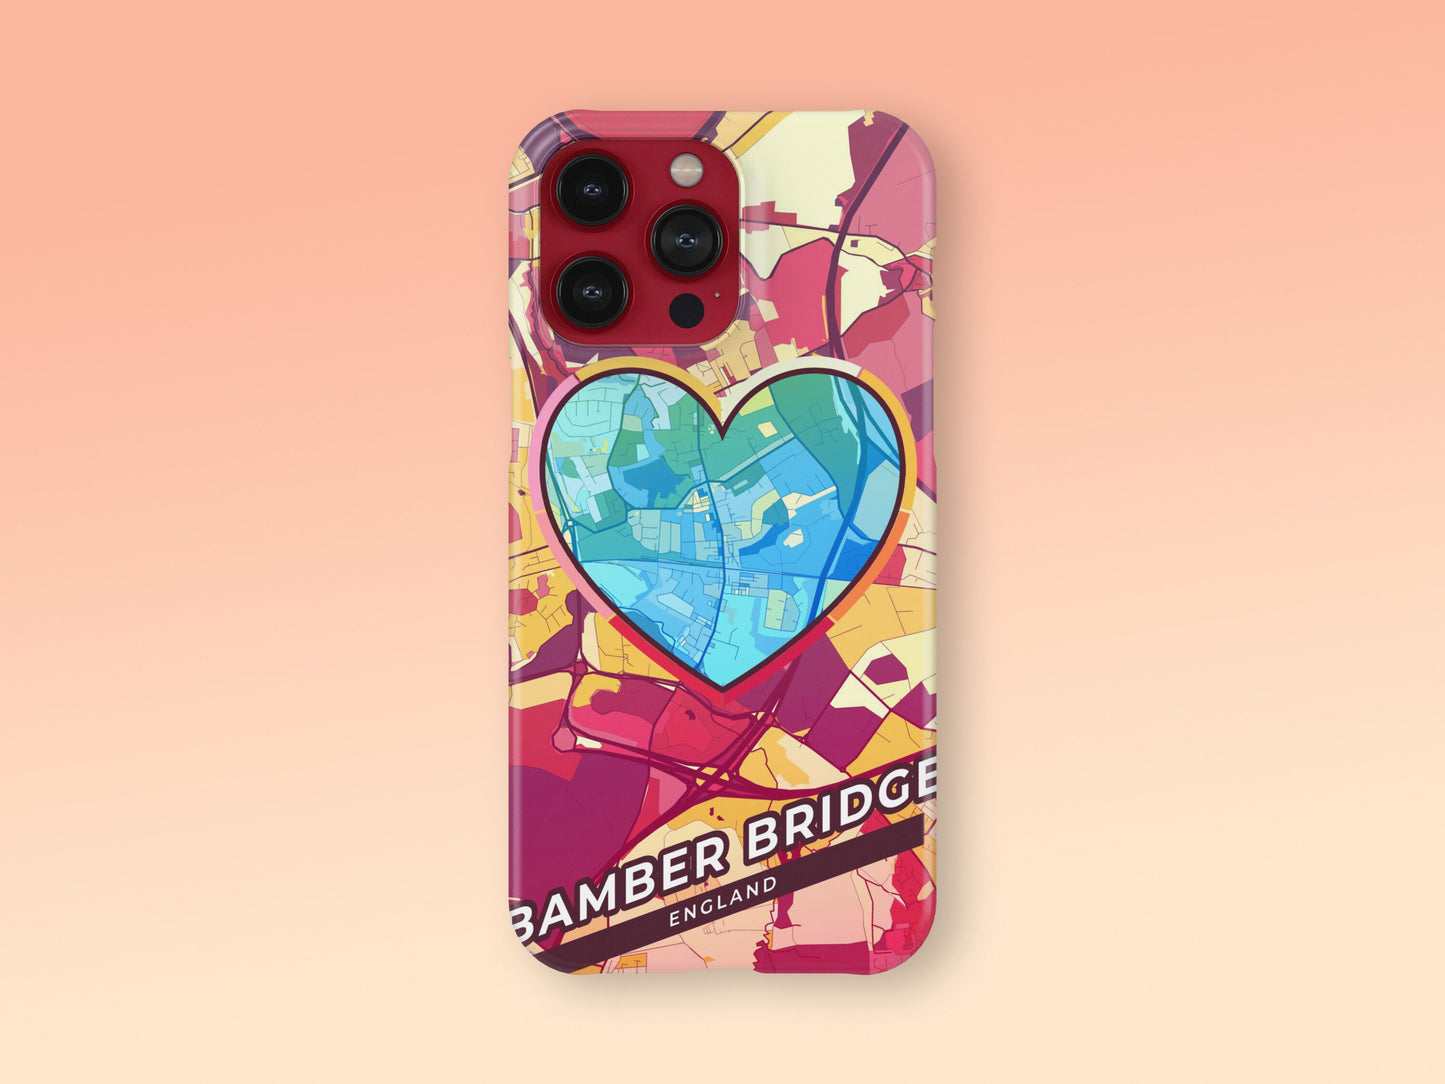 Bamber Bridge England slim phone case with colorful icon. Birthday, wedding or housewarming gift. Couple match cases. 2